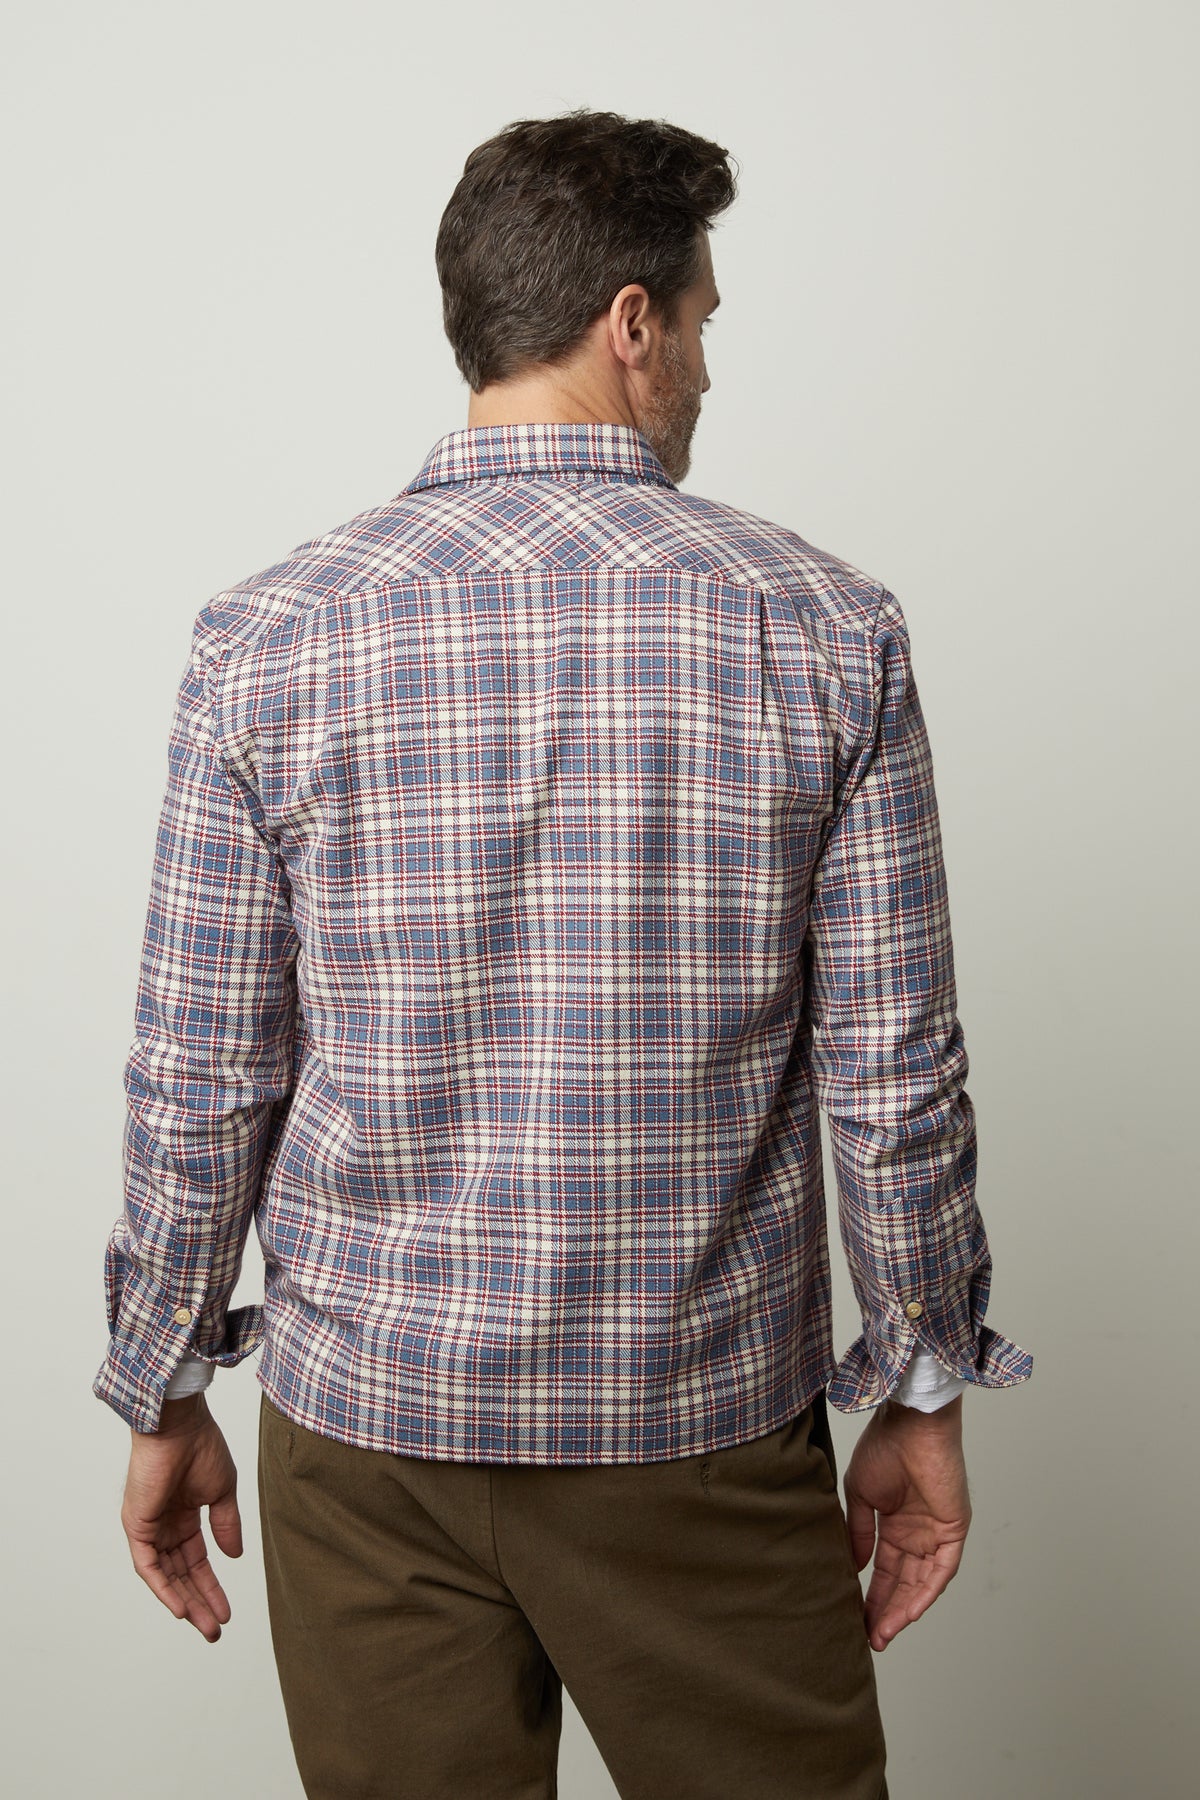 The back view of a man wearing a Velvet by Graham & Spencer STAN PLAID BUTTON-UP SHIRT.-26846194925761